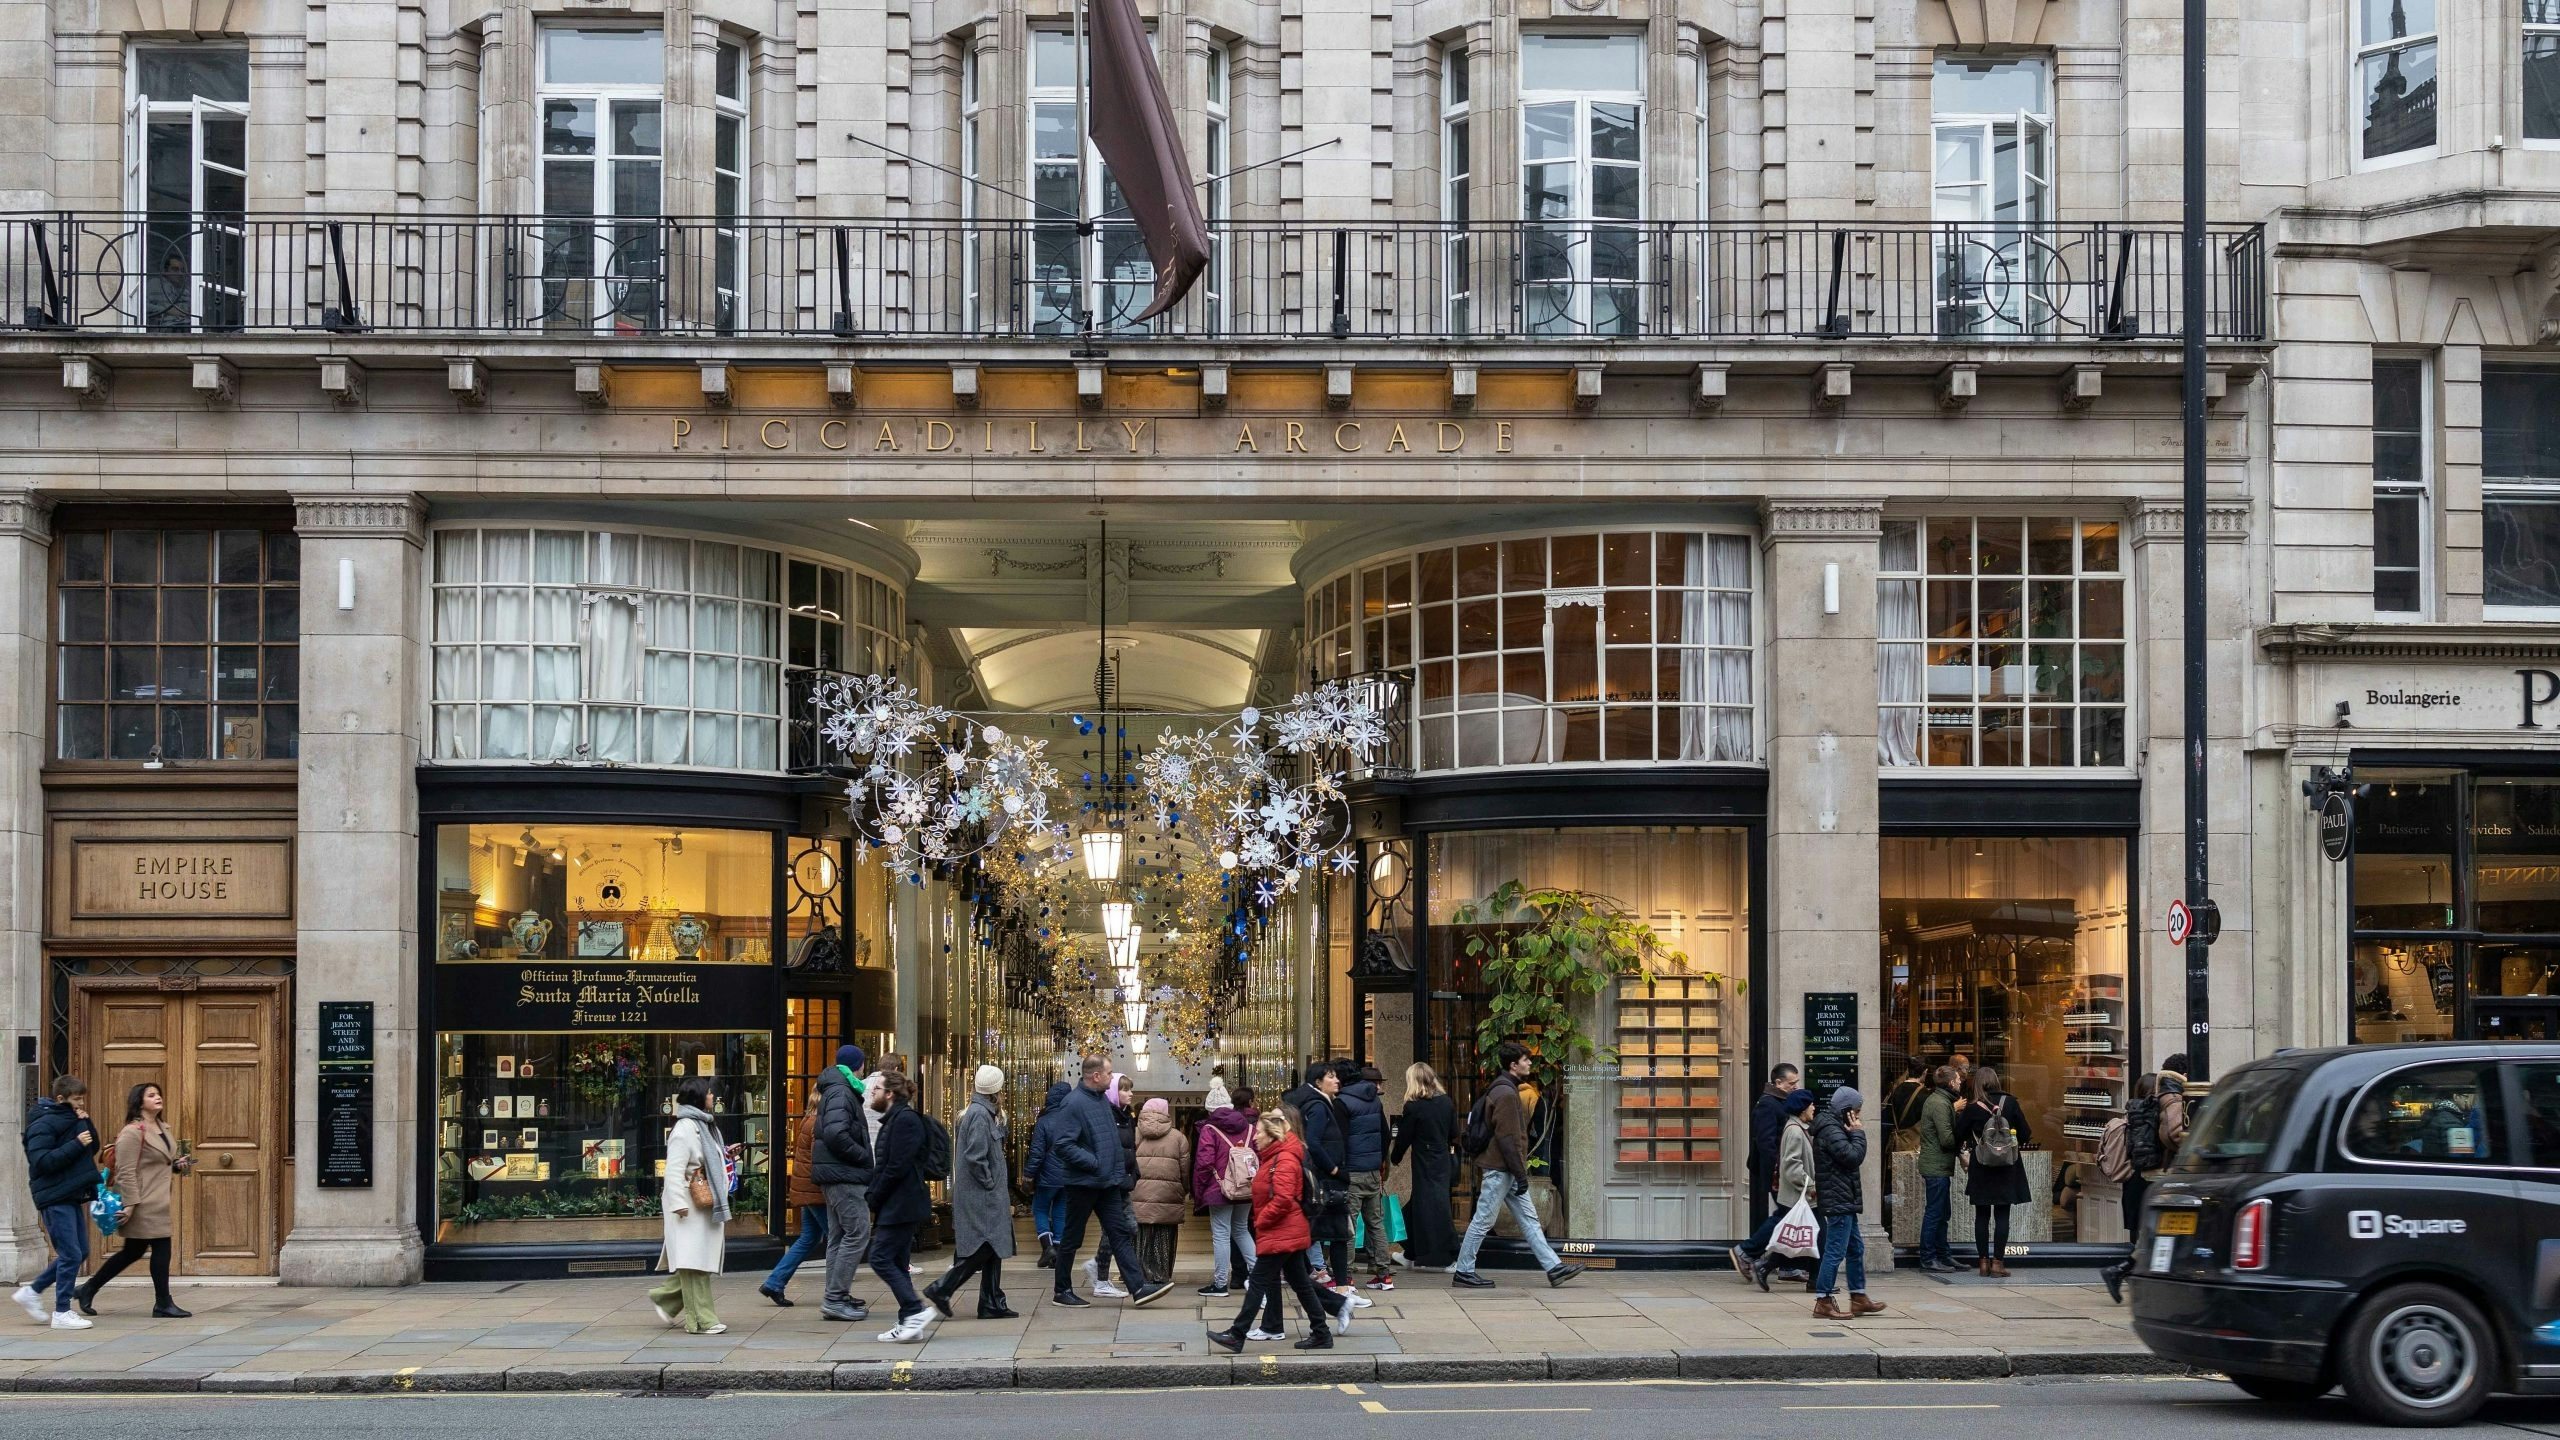 The UK has lost its allure as a luxury shopping destination among Chinese tourists, primarily due to the withdrawal of its tourist tax refund policy. Photo: Shutterstock